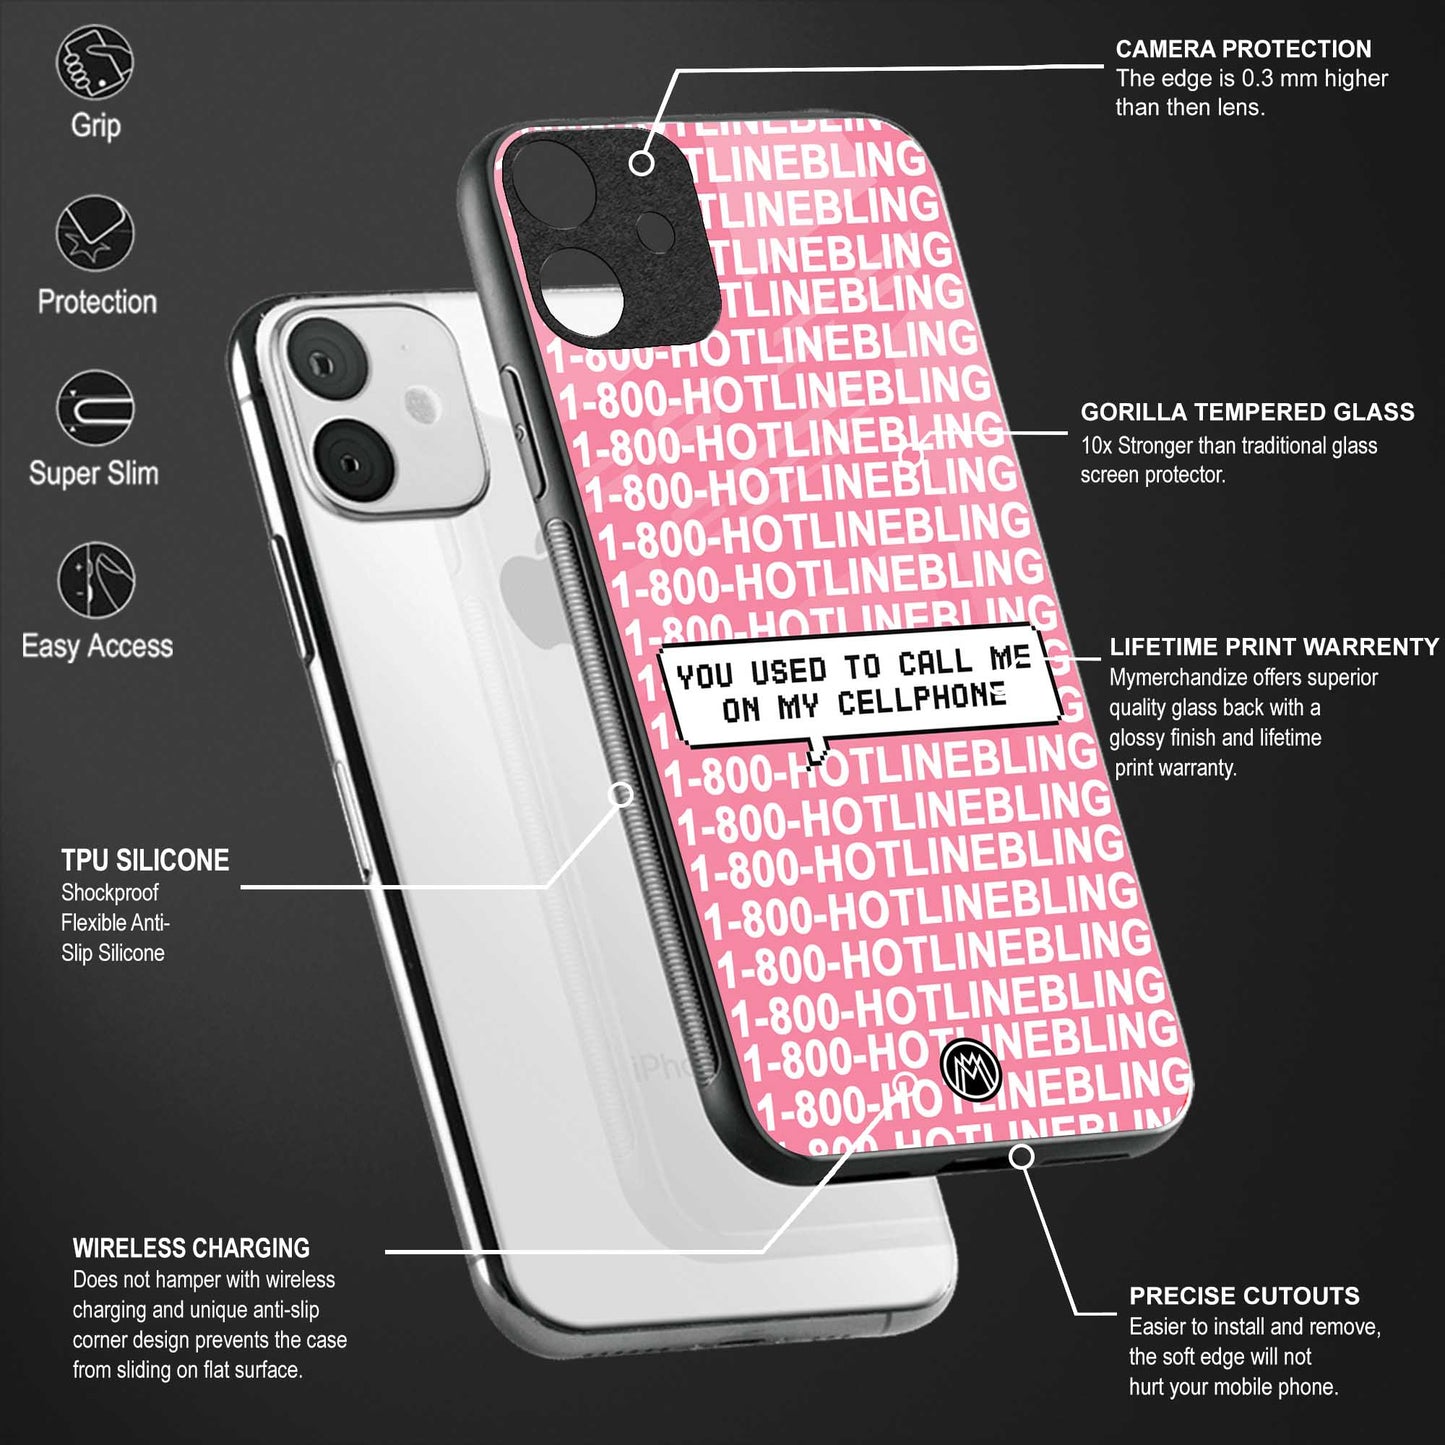 1800 hotline bling phone cover for redmi 9a 